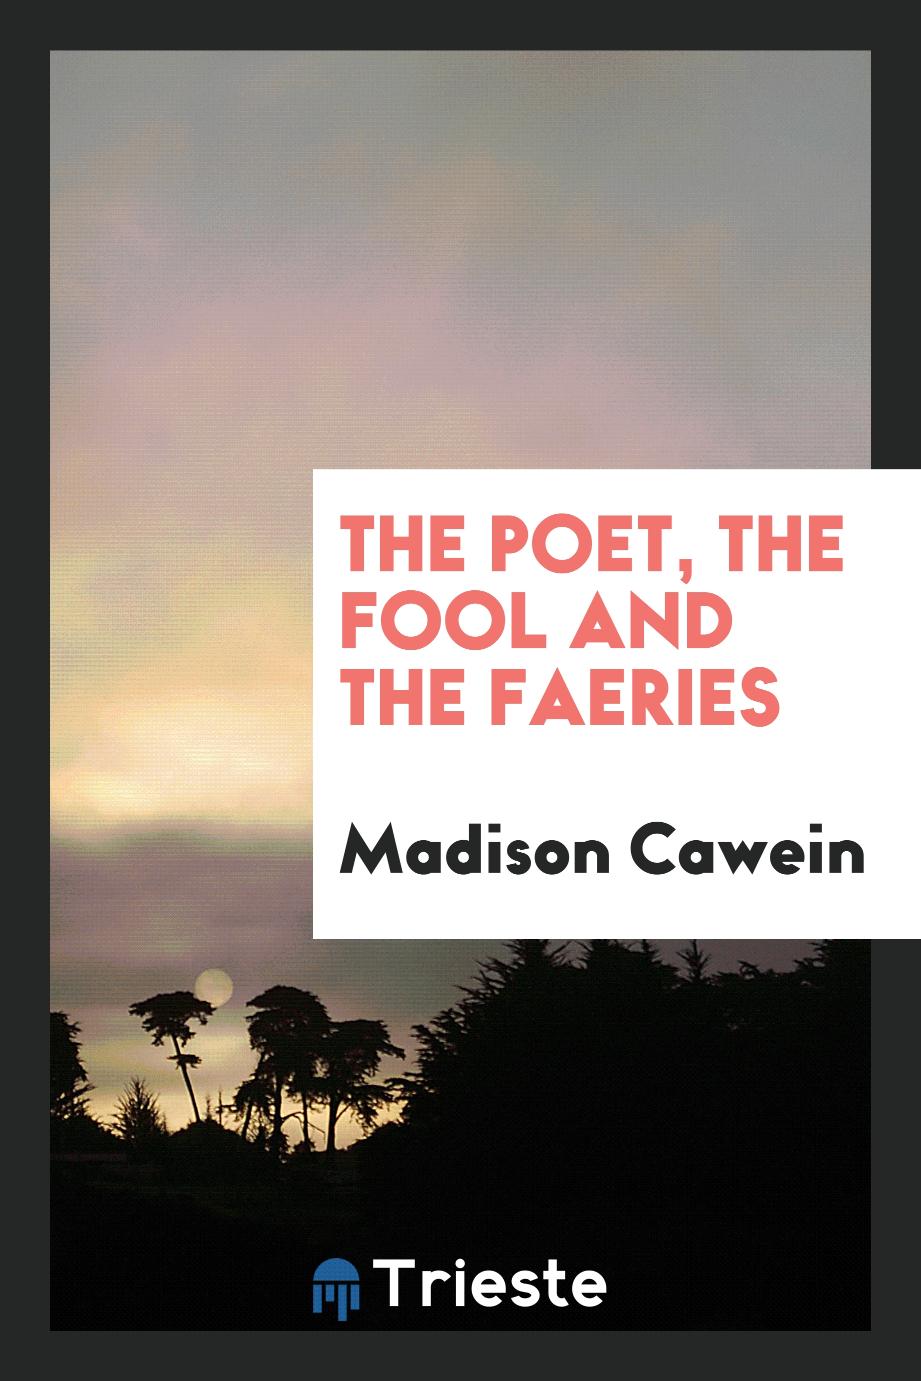 The poet, the fool and the faeries